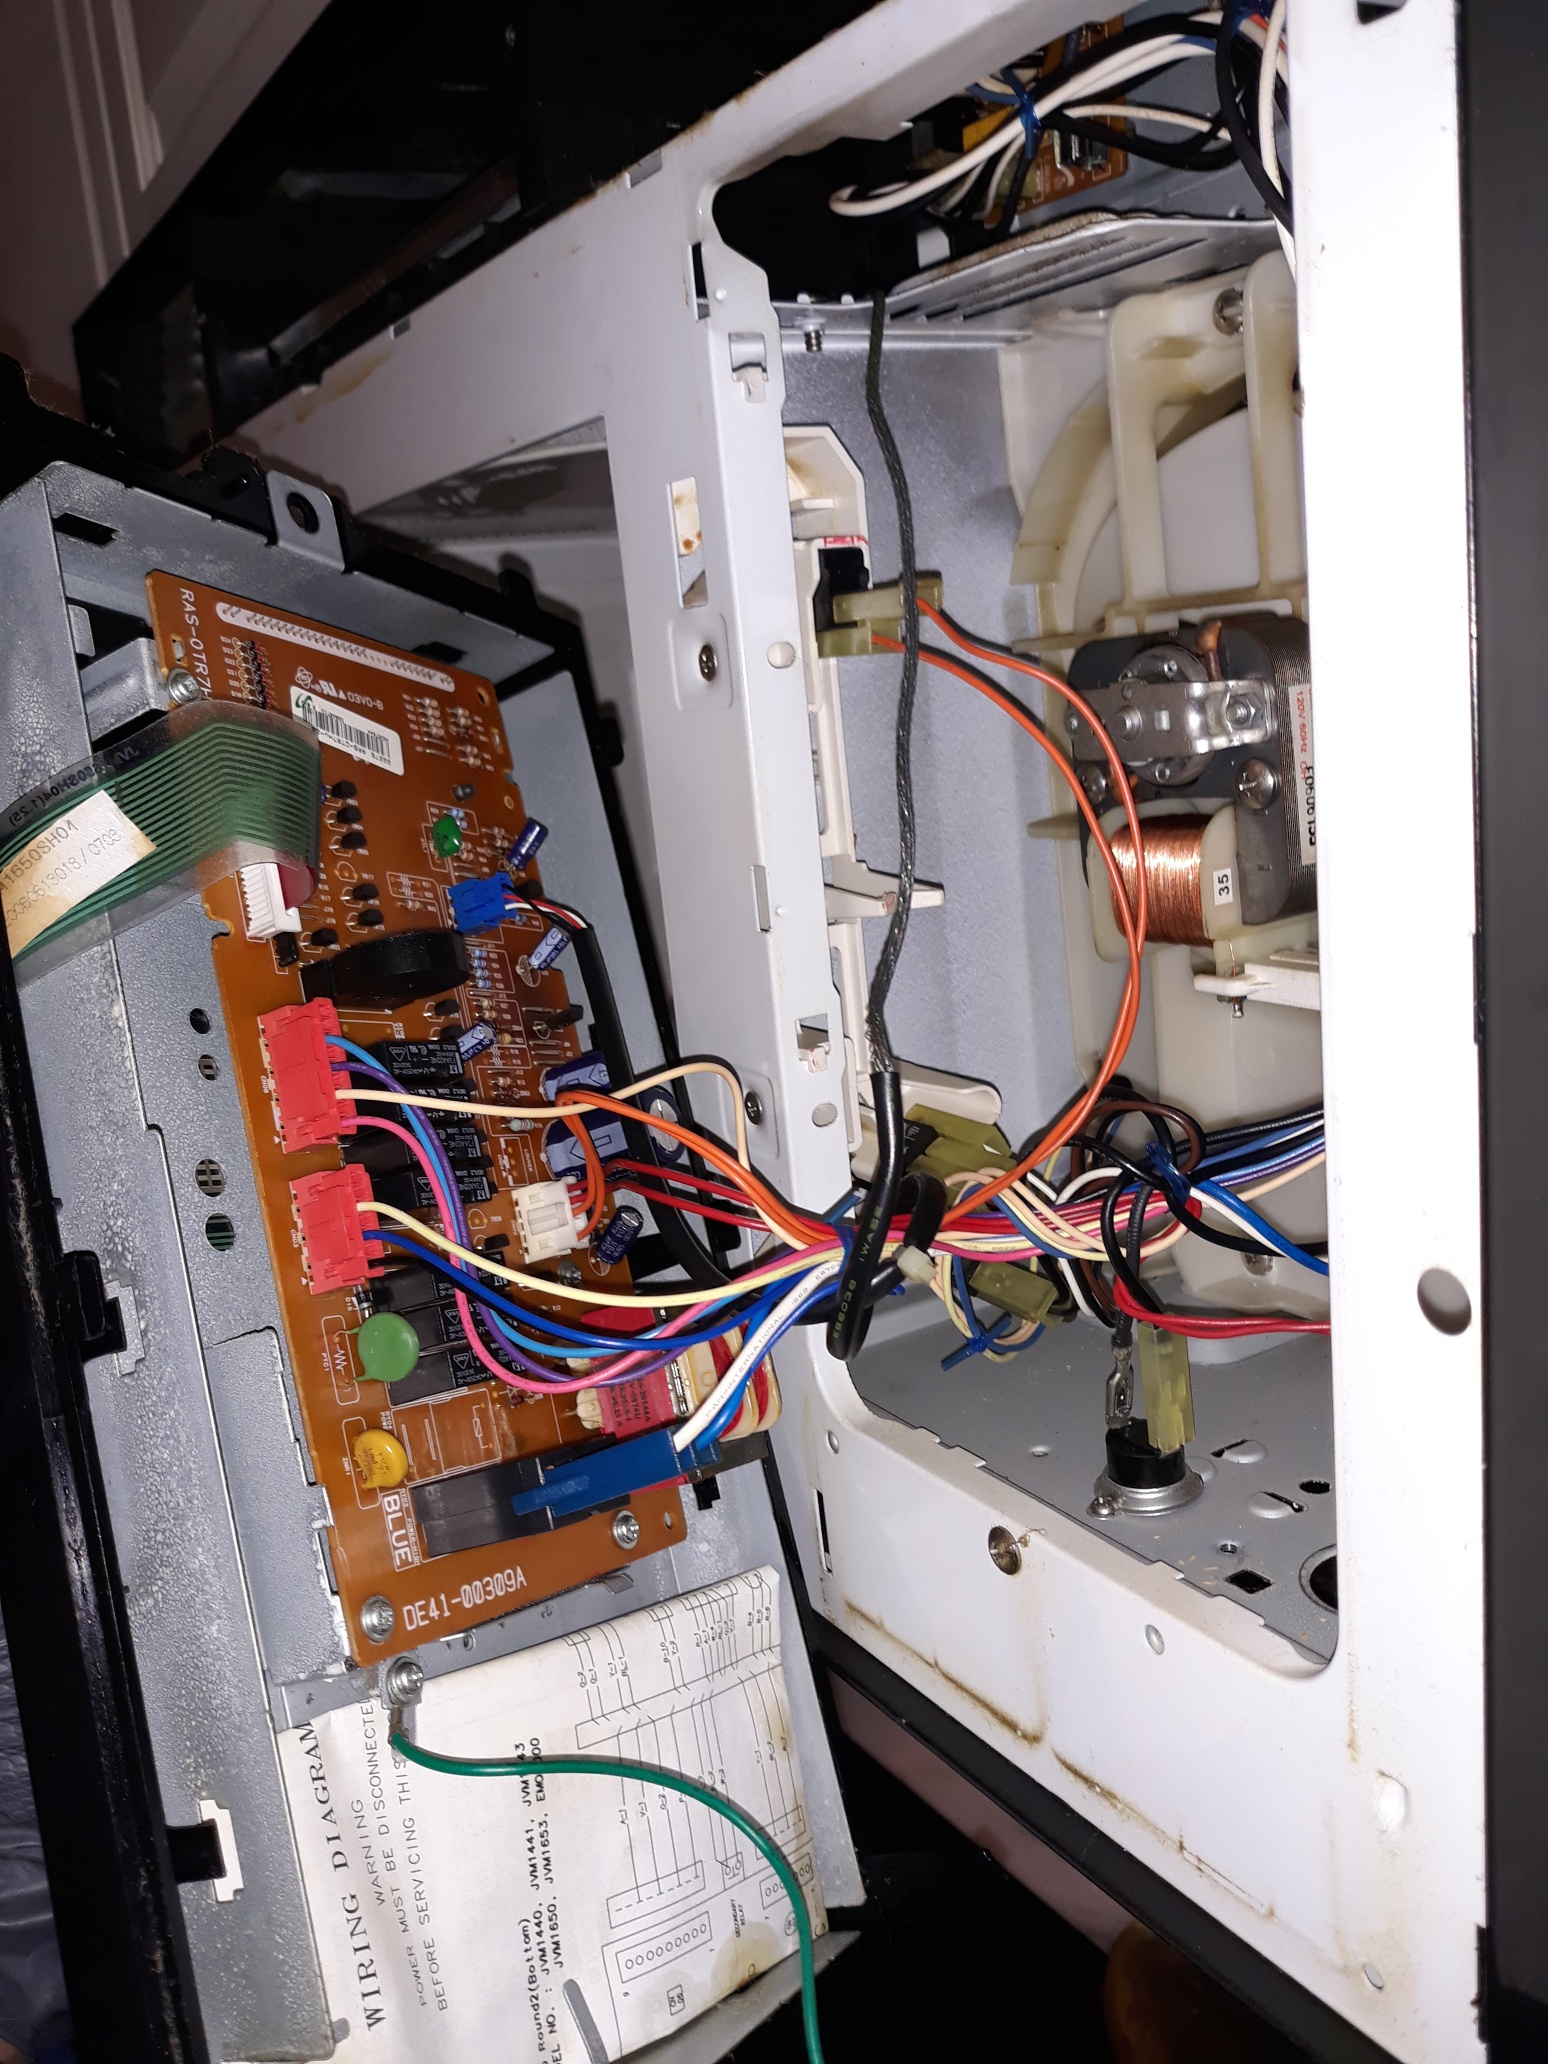 appliance repair microwave repair repair require replacement of the shorted and overheated main control board and inline fuse with new parts autumn leaf cir wildwood fl 34785